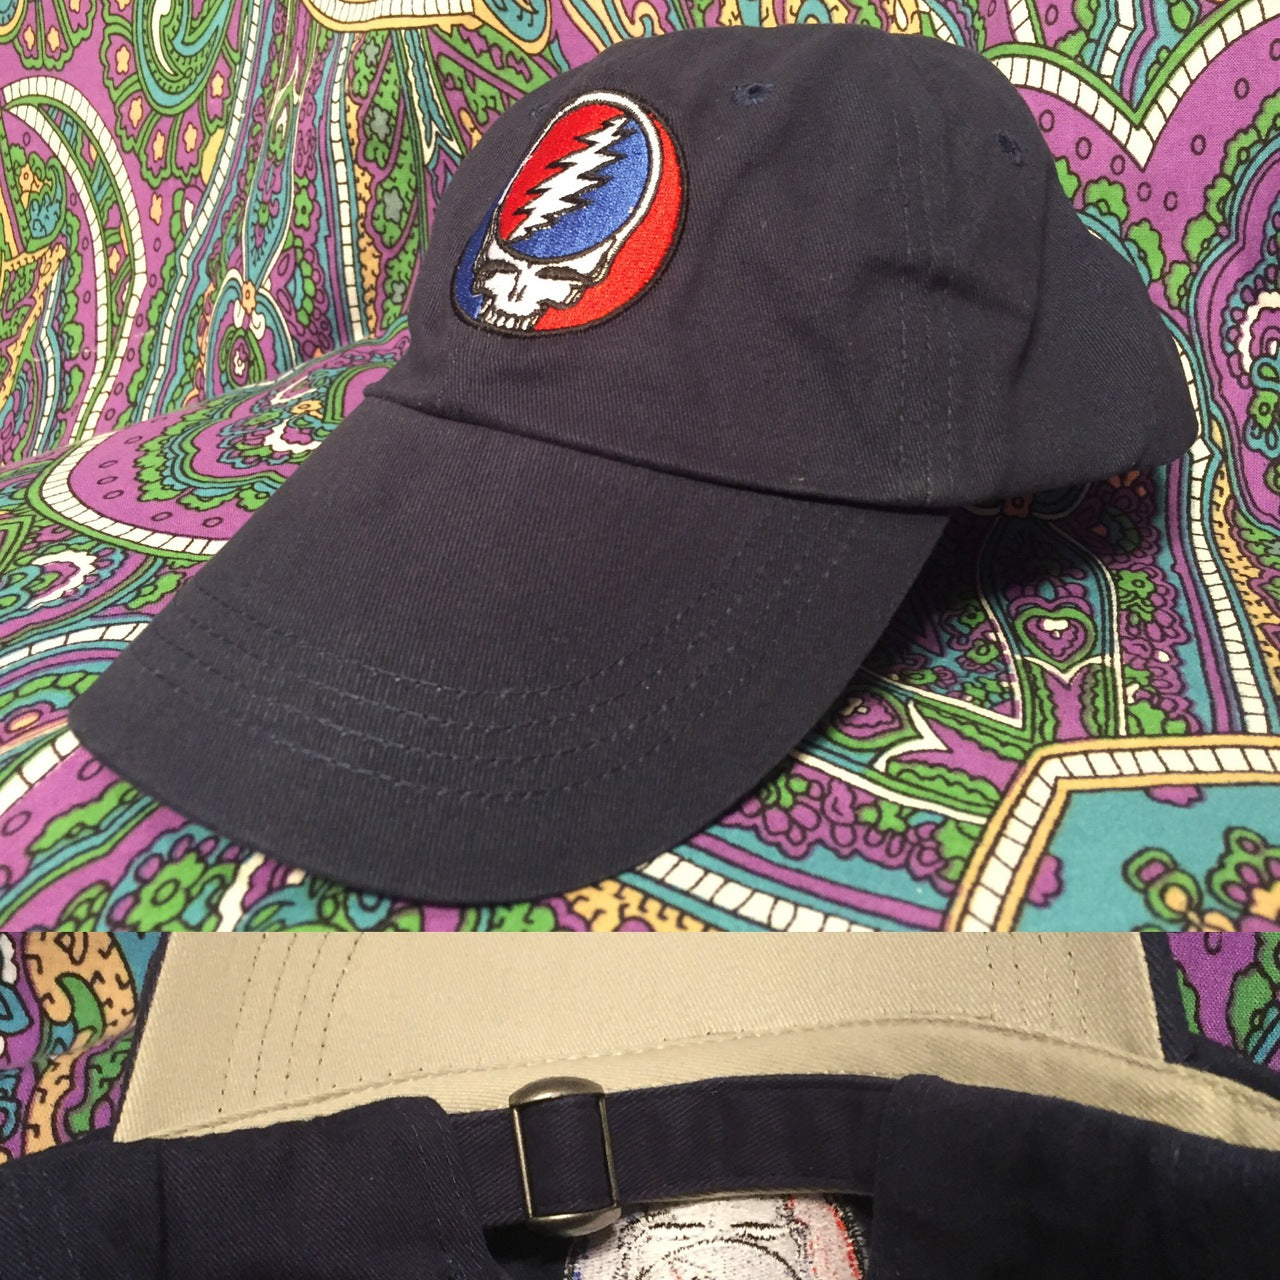 Steal your face low profile hat